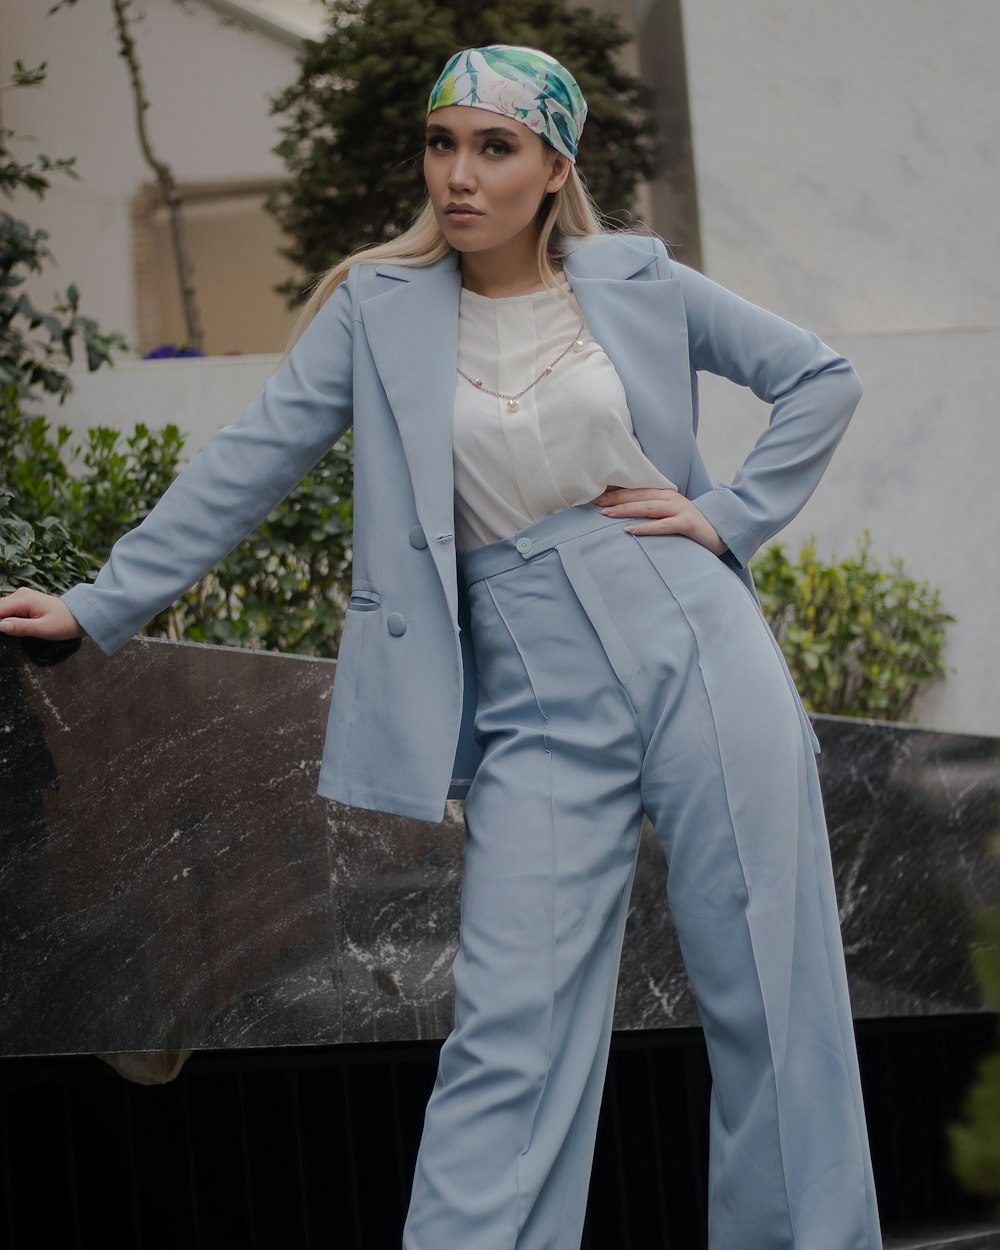 a woman wearing a blue suit and headband